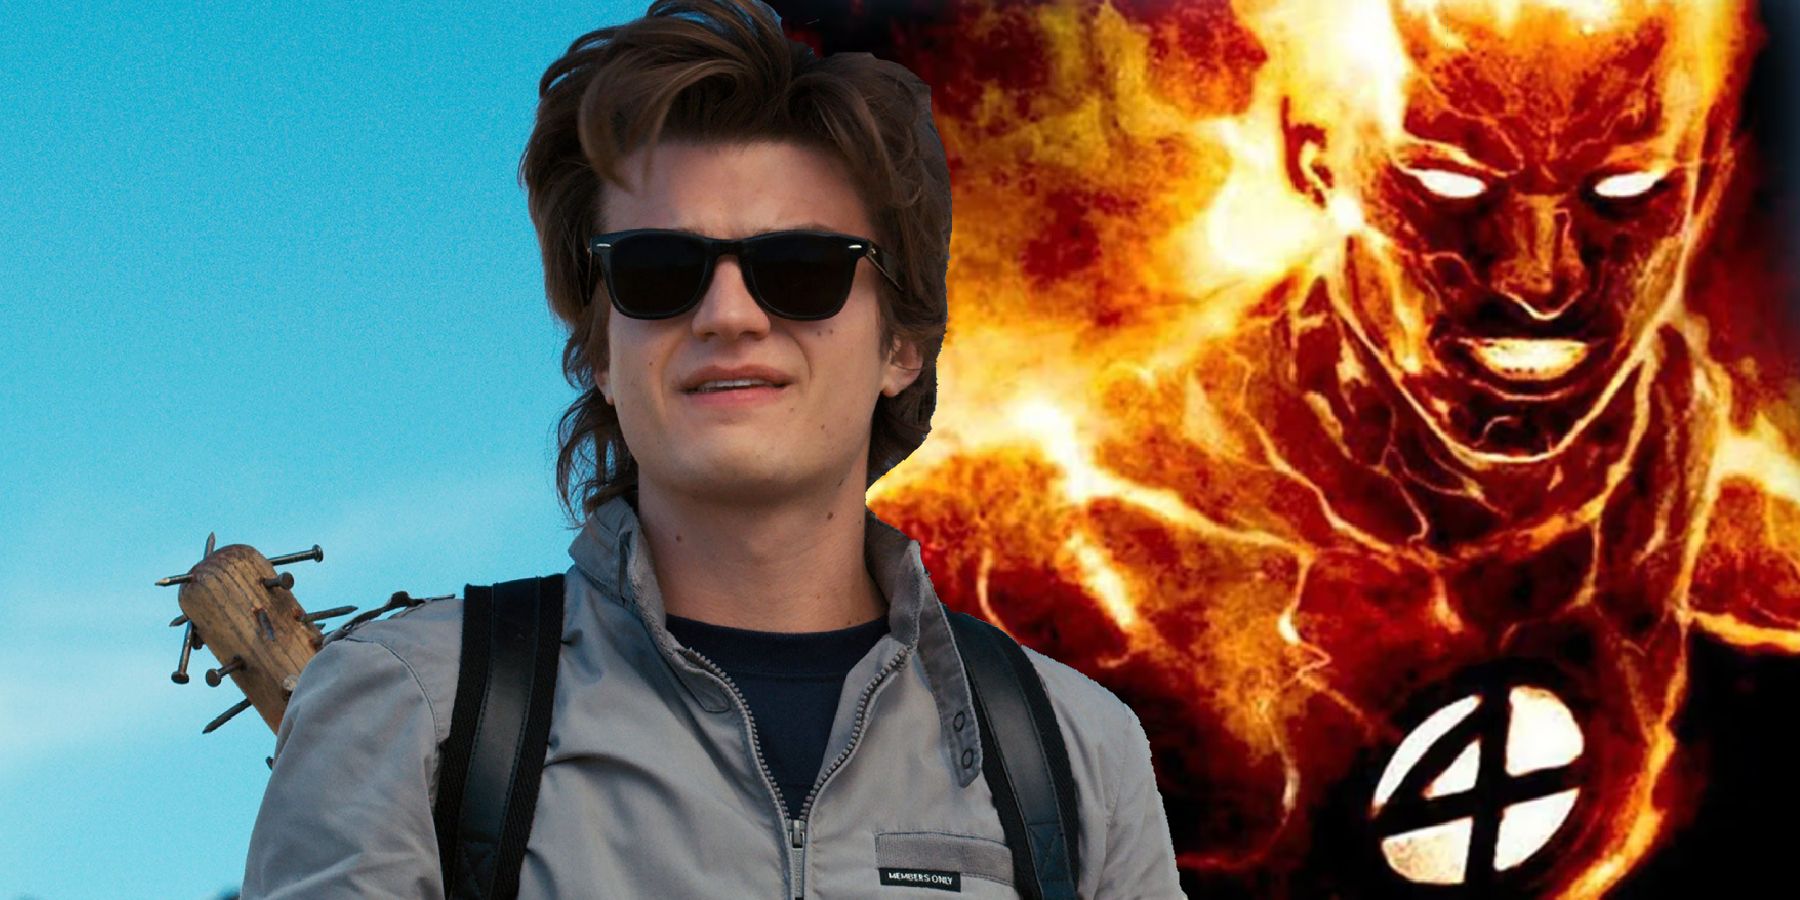 Joe Keery rumored to be the MCU's Human Torch at Comic-Con 2022